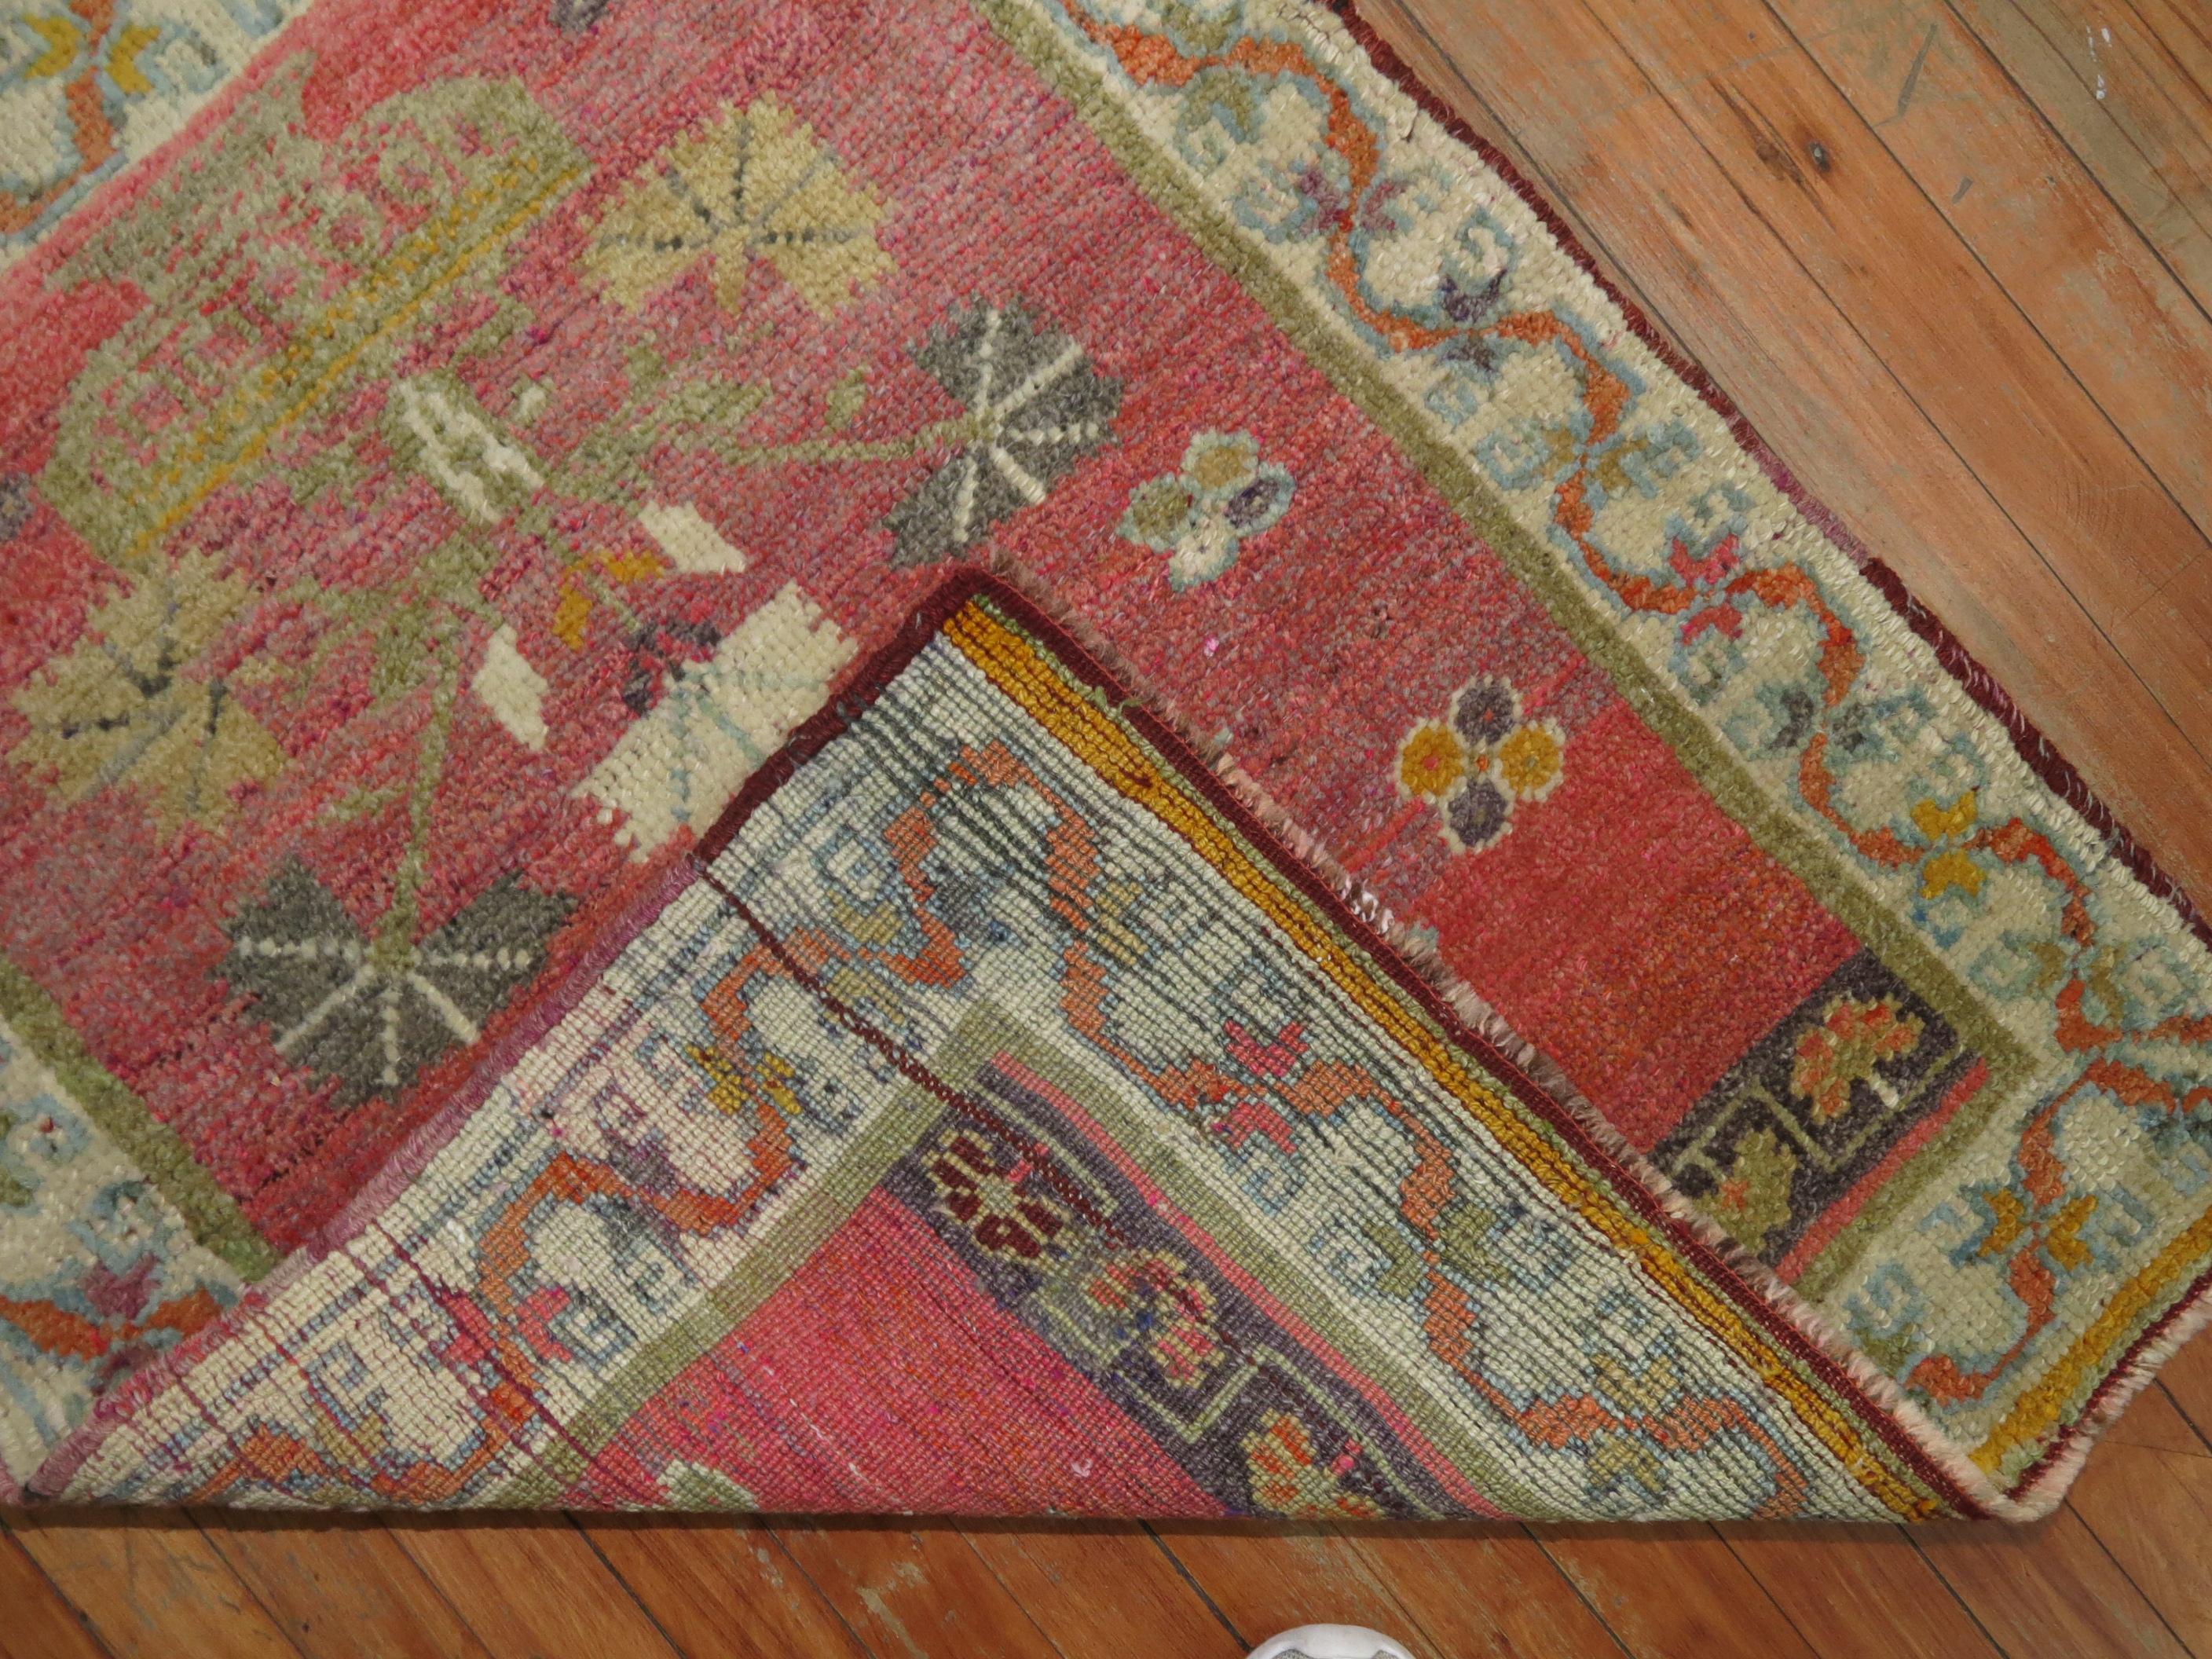 Soft pink coral color midcentury Turkish Anatolian rug.

Measures: 2'7” x 3'3”.